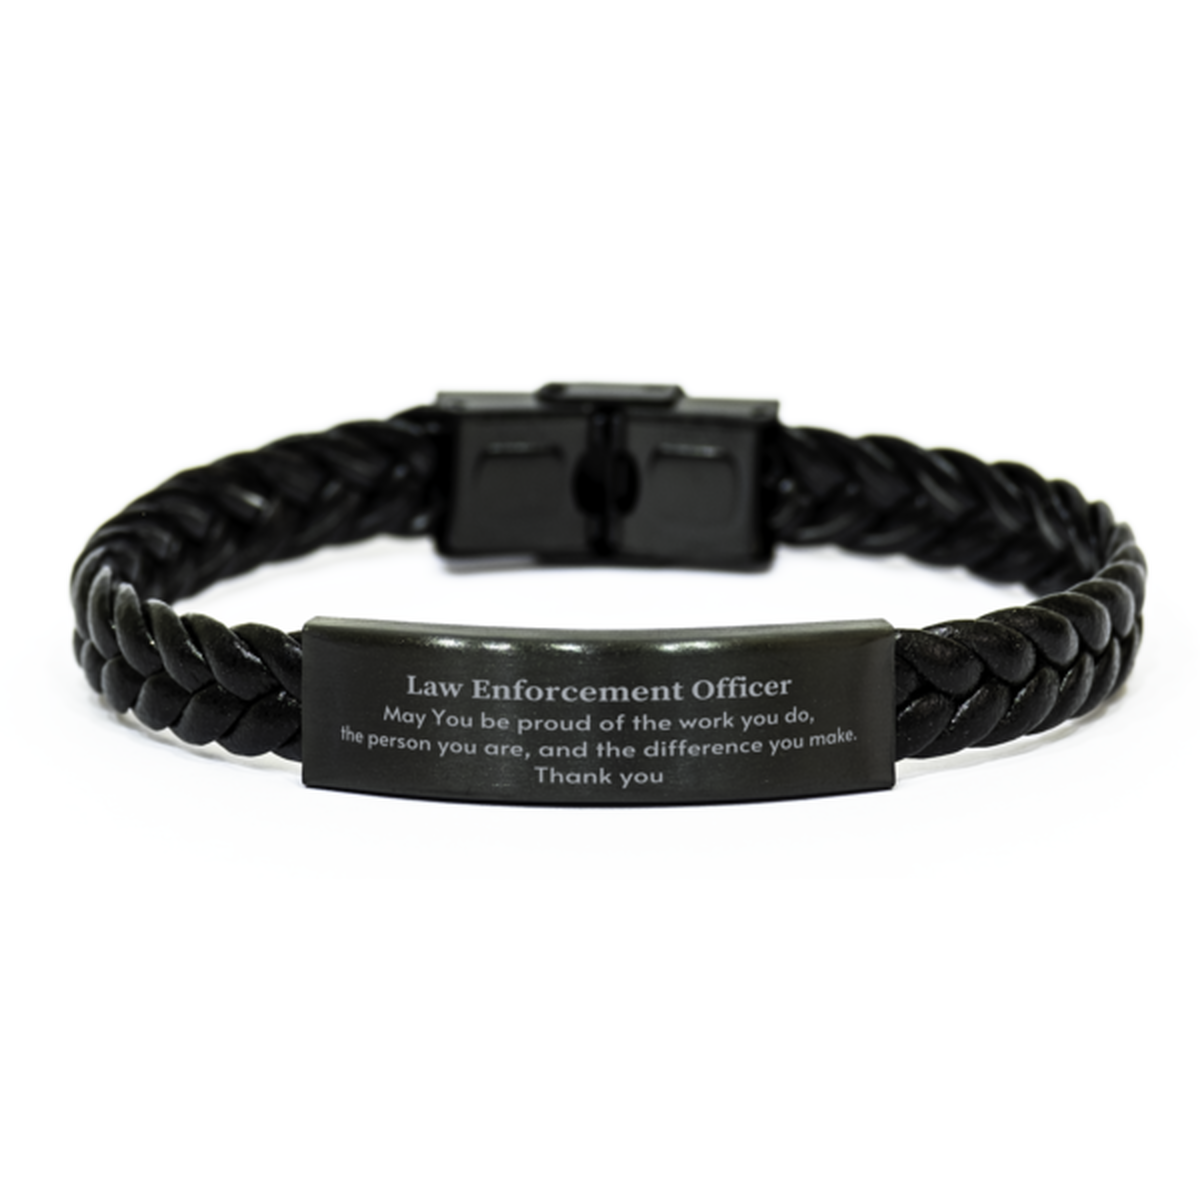 Heartwarming Braided Leather Bracelet Retirement Coworkers Gifts for Law Enforcement Officer, Law Enforcement Officer May You be proud of the work you do, the person you are Gifts for Boss Men Women Friends